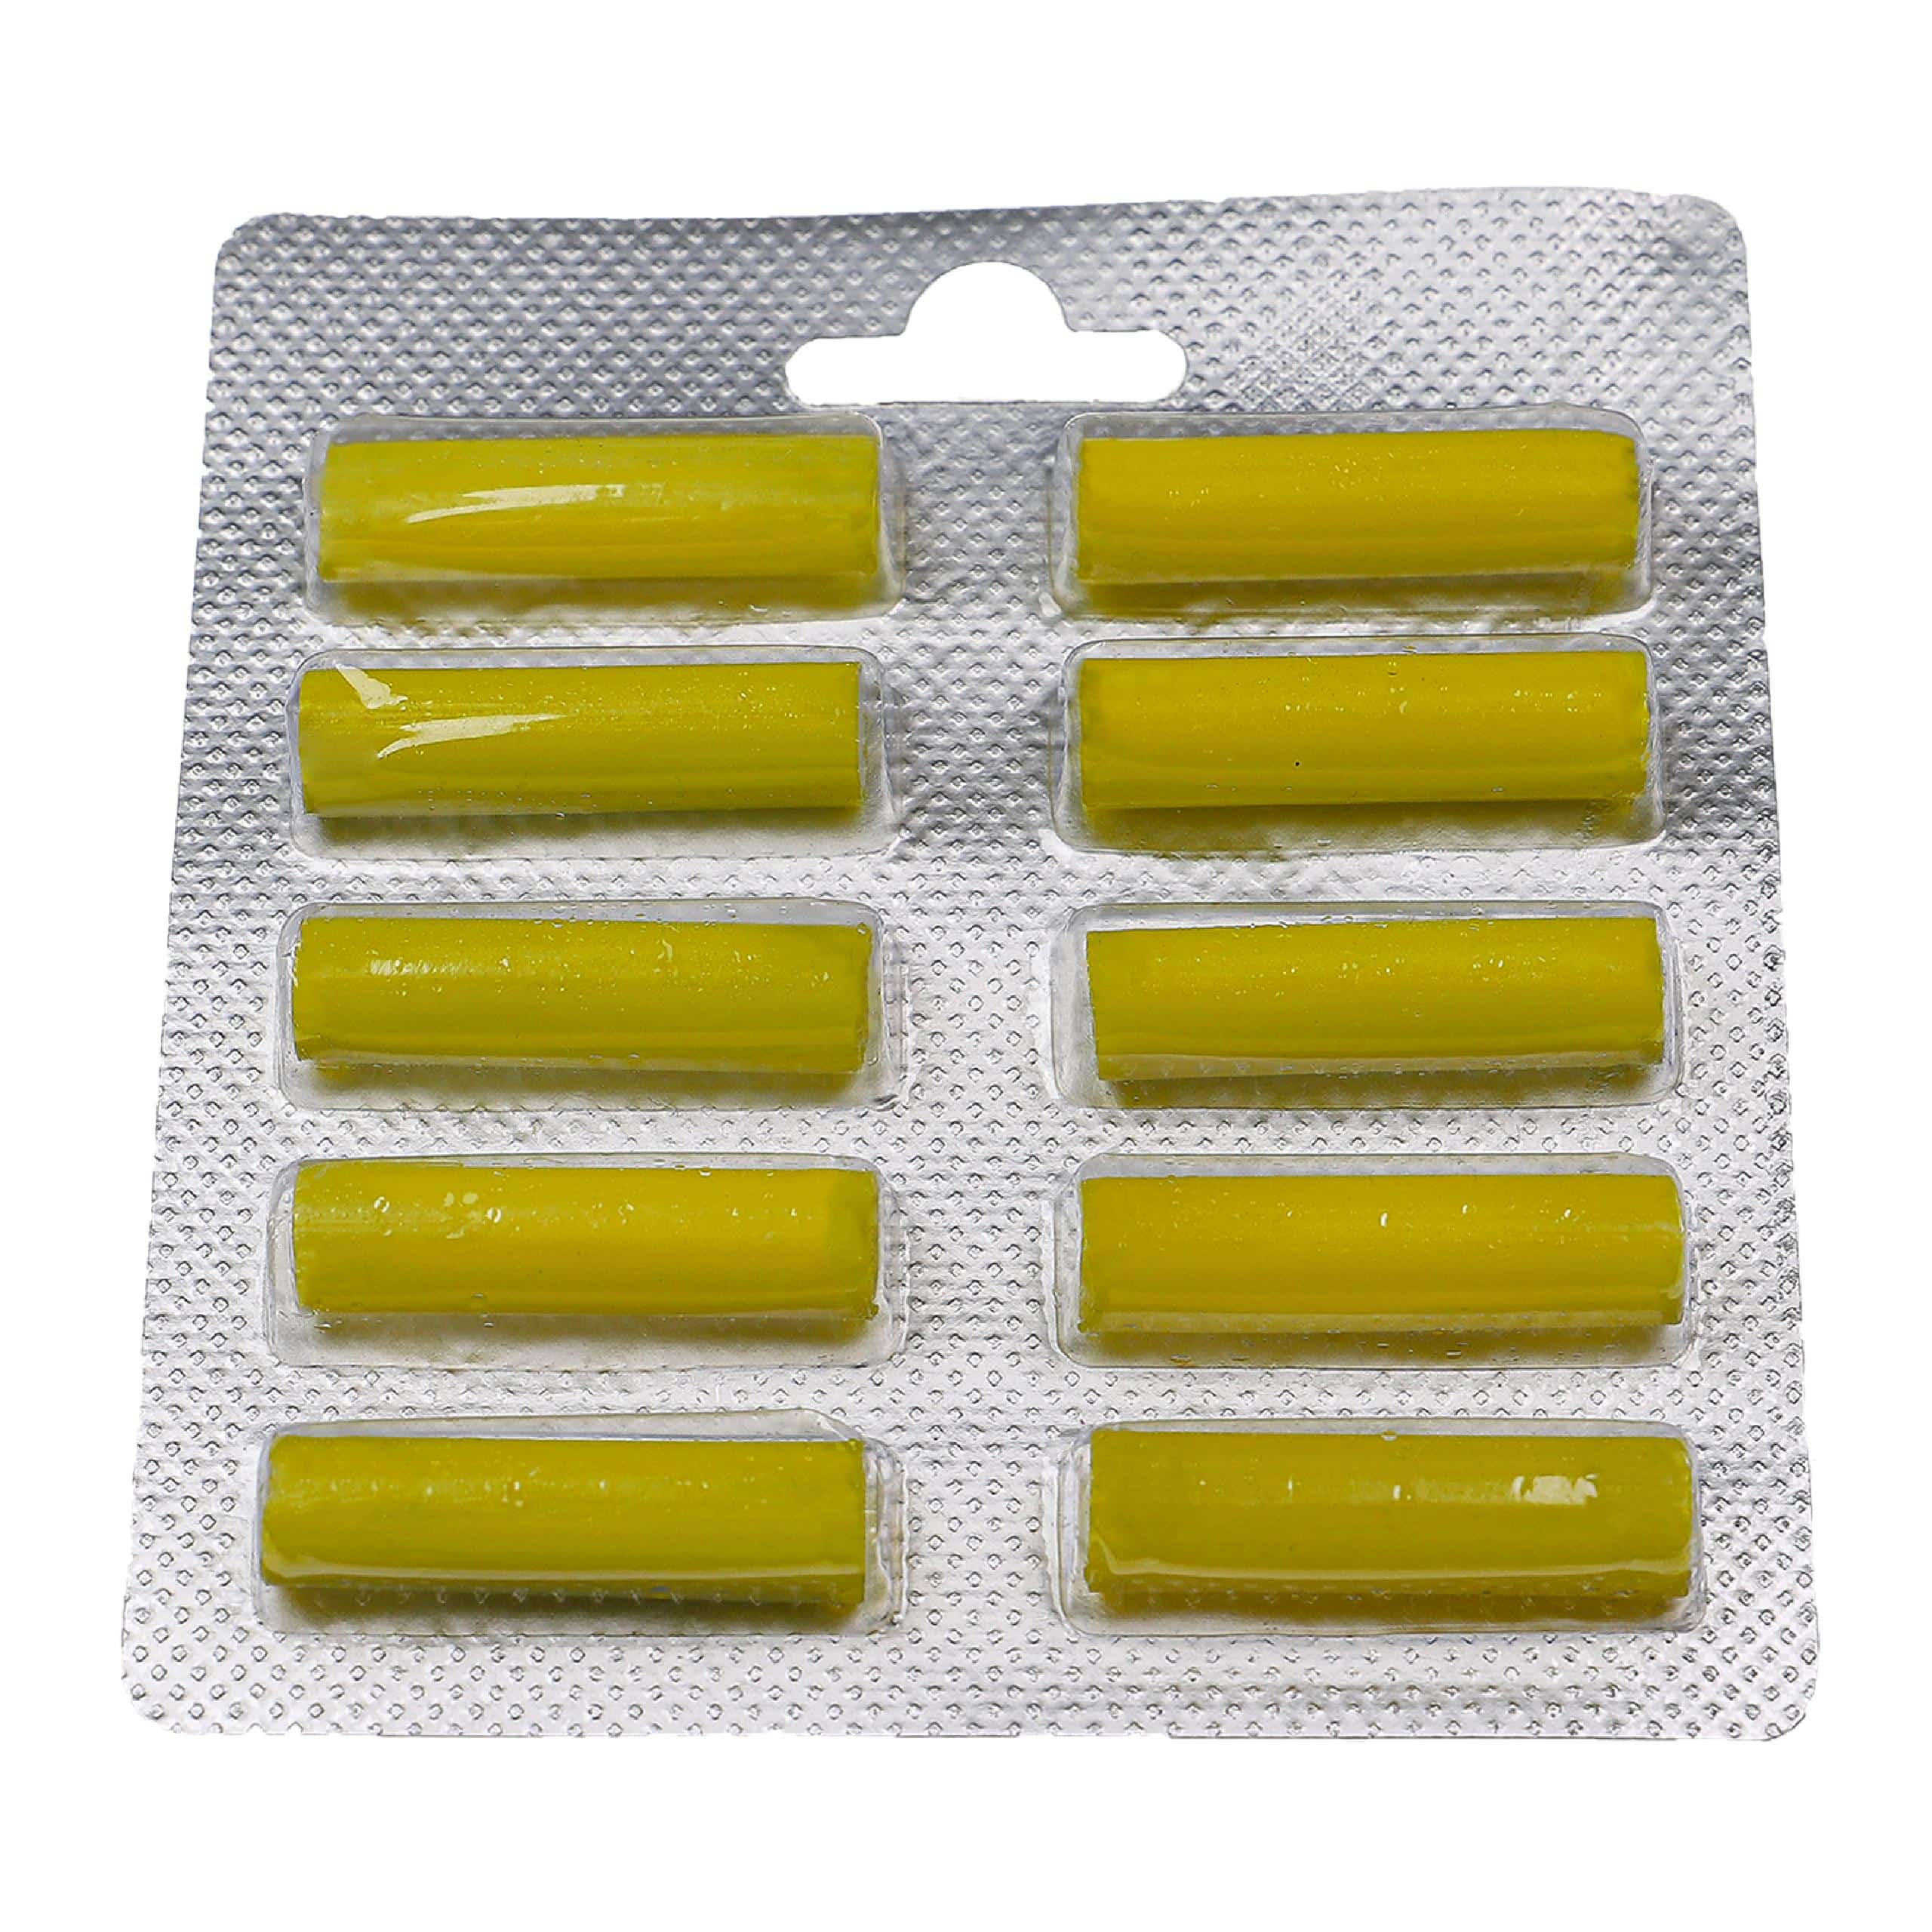 10x Air Freshener Sticks suitable forvarious Vacuum Cleaners with Bag - lemon